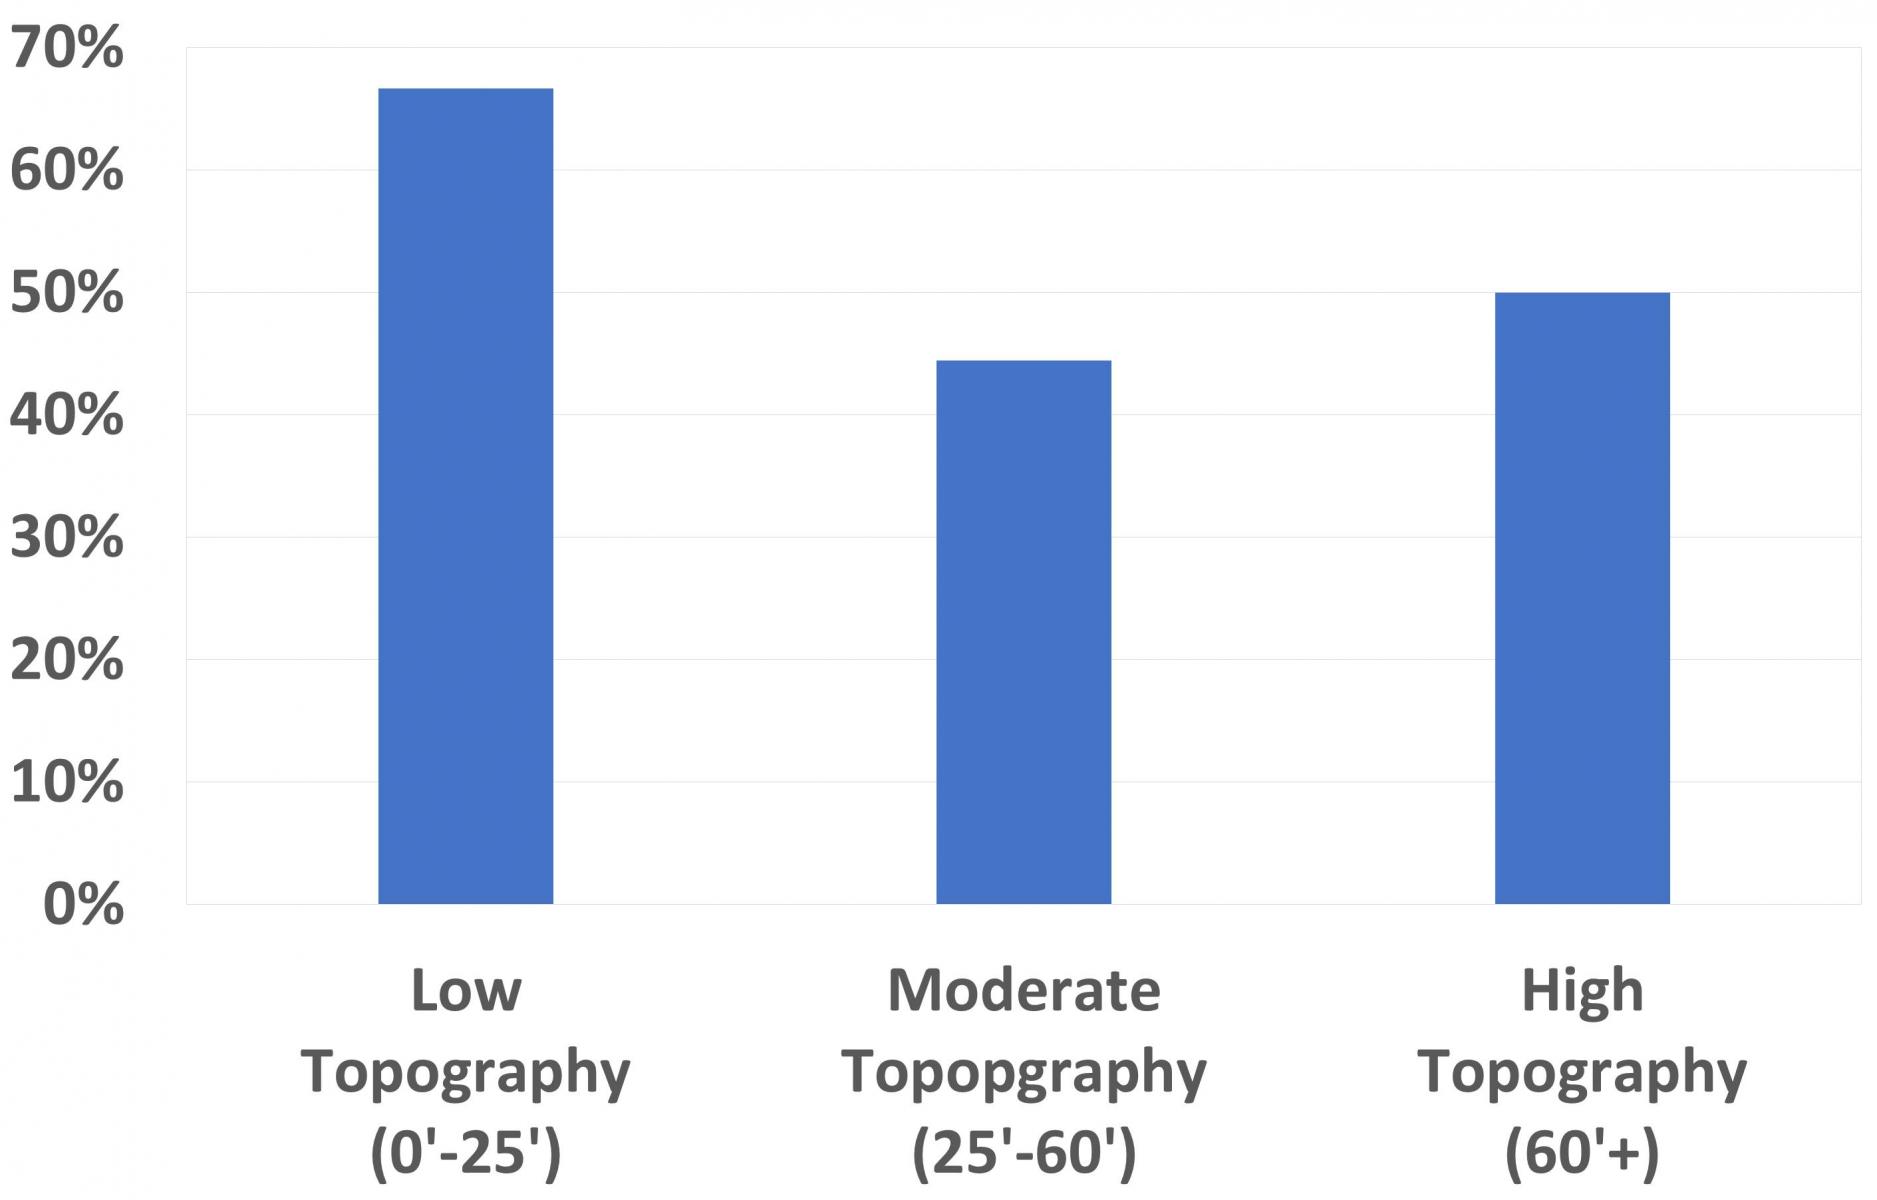 roughly 75% at low topography, 45% at moderate topography, and 50% at high topography